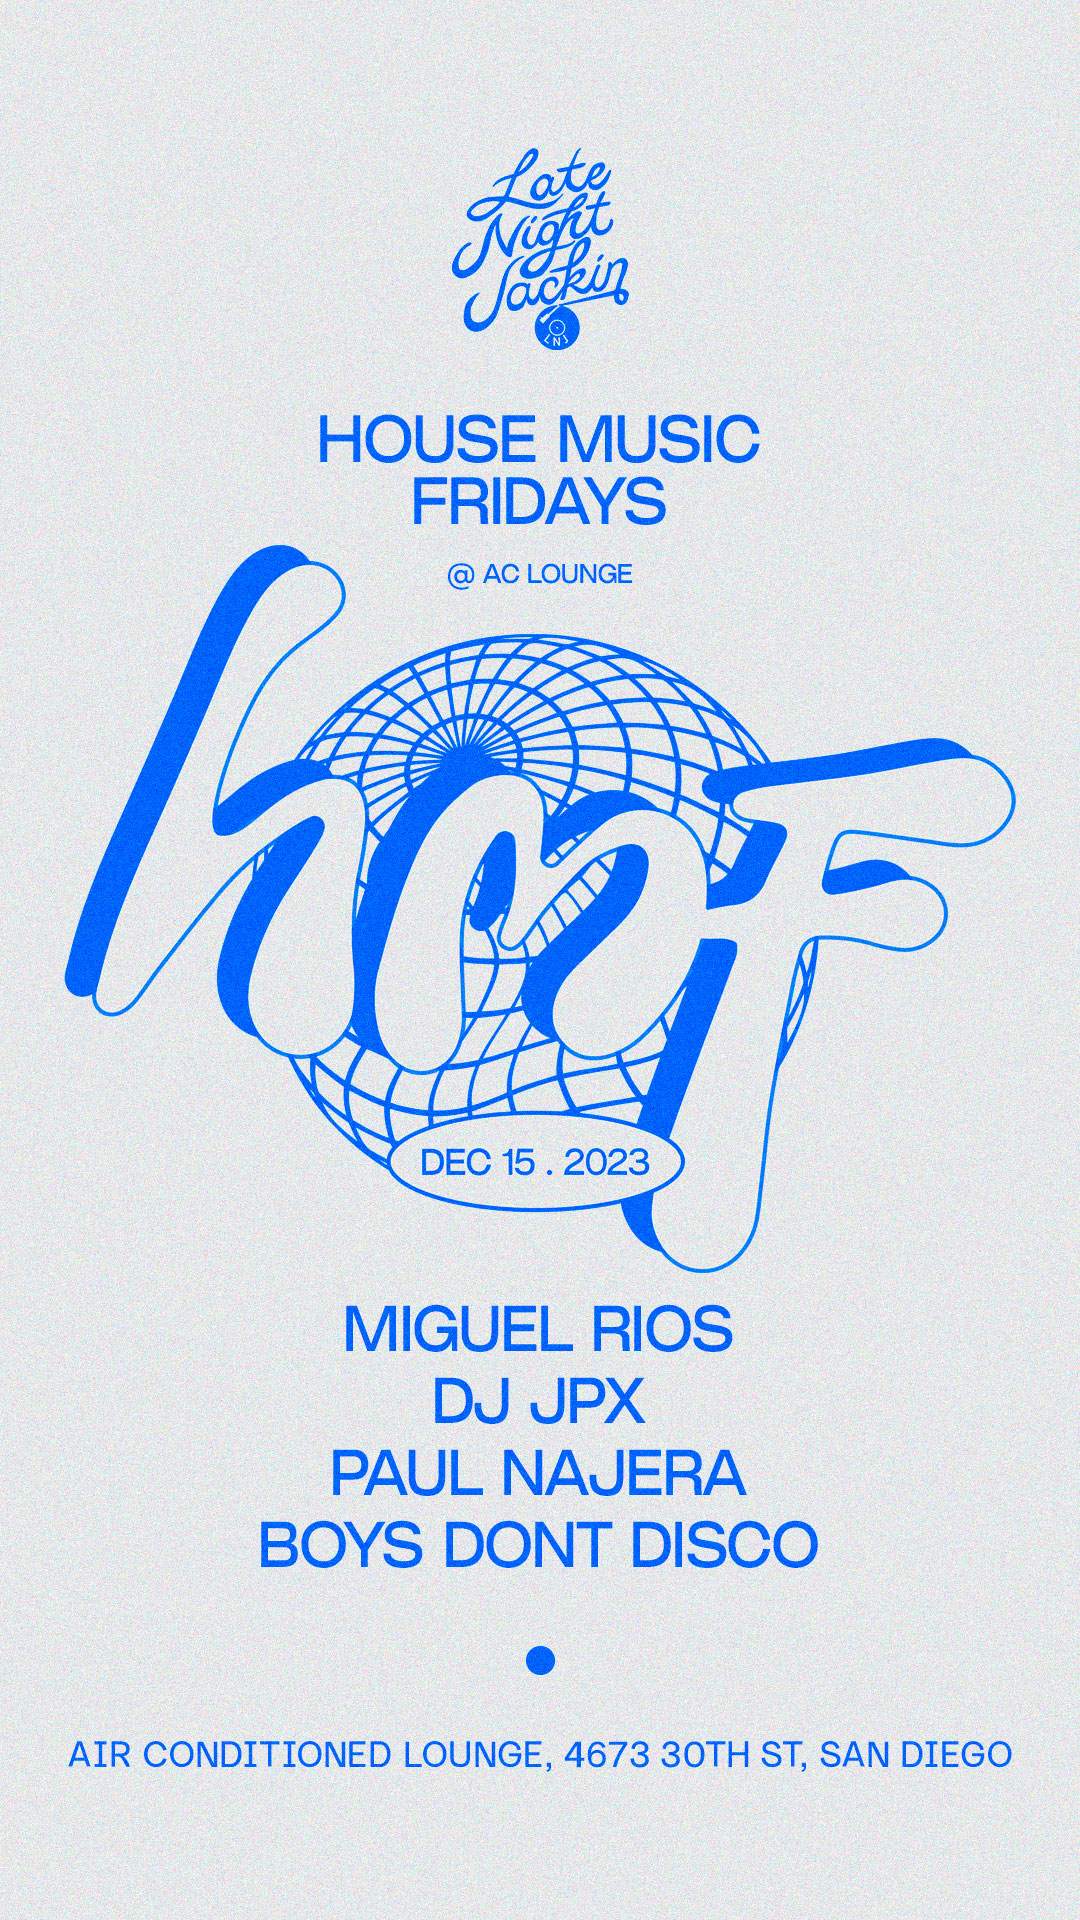 Late Night Jackin: House Music Fridays with Miguel Rios (Moulton Music, Large) - Página frontal